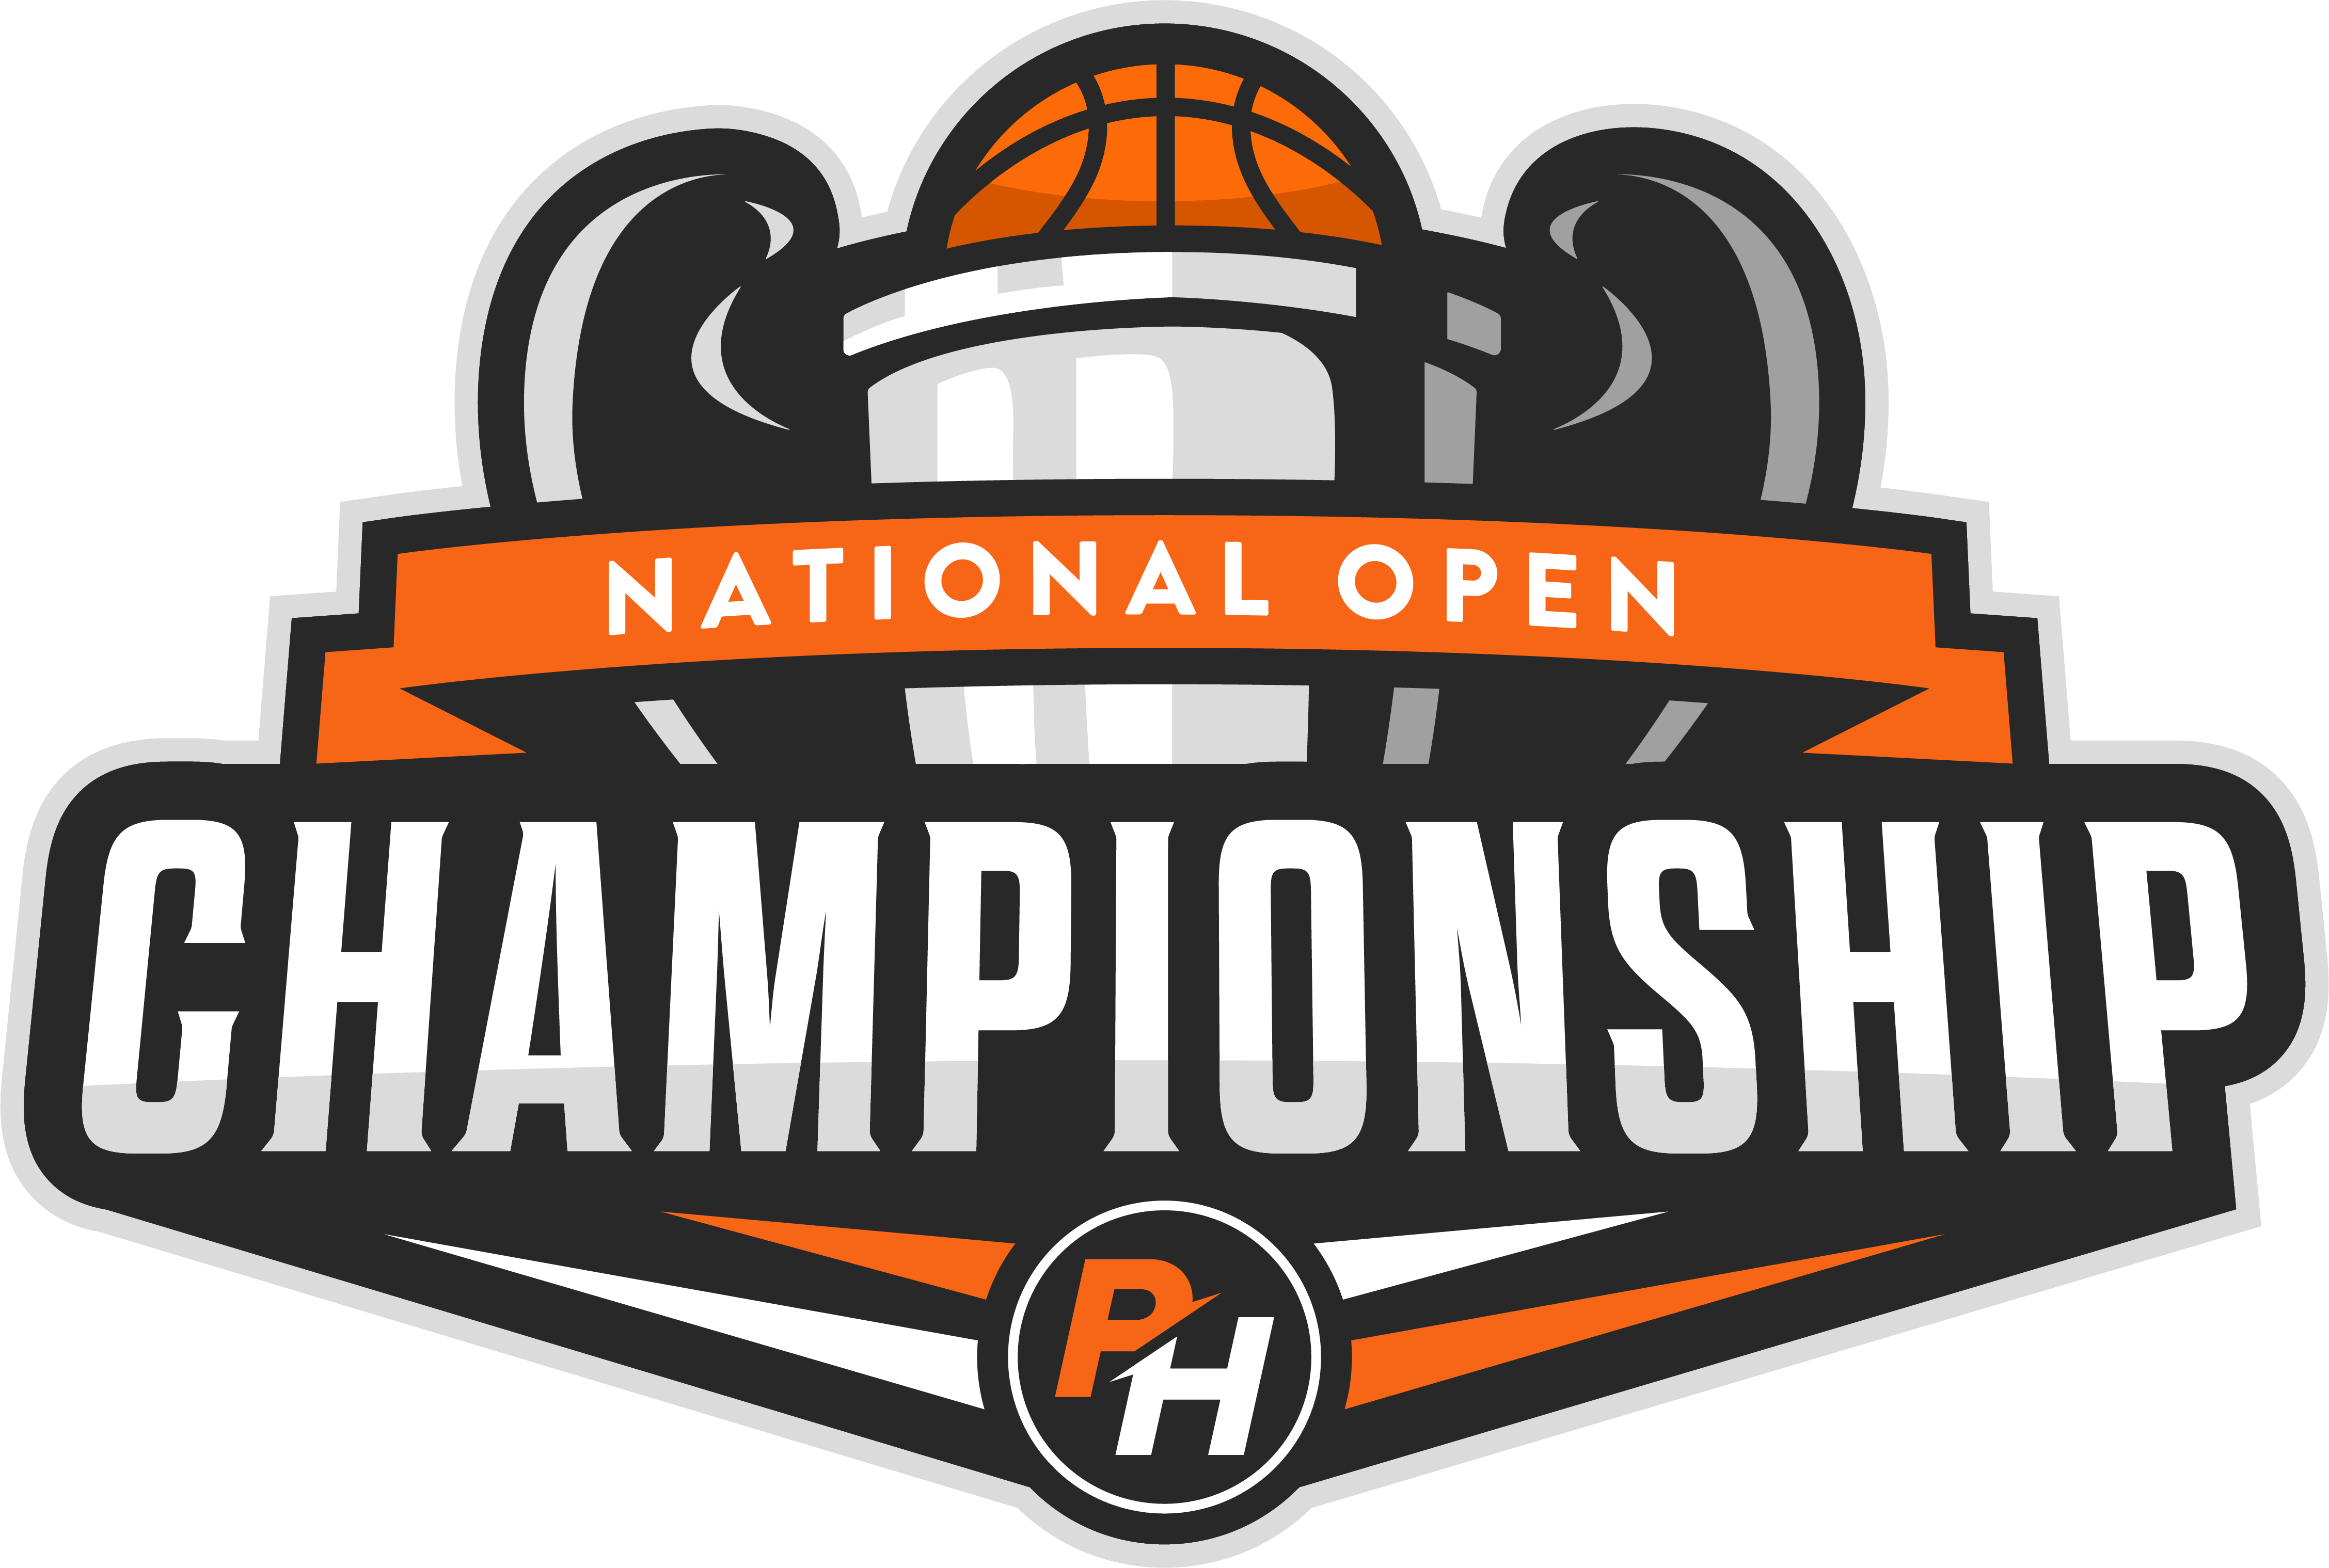 National Open Championship